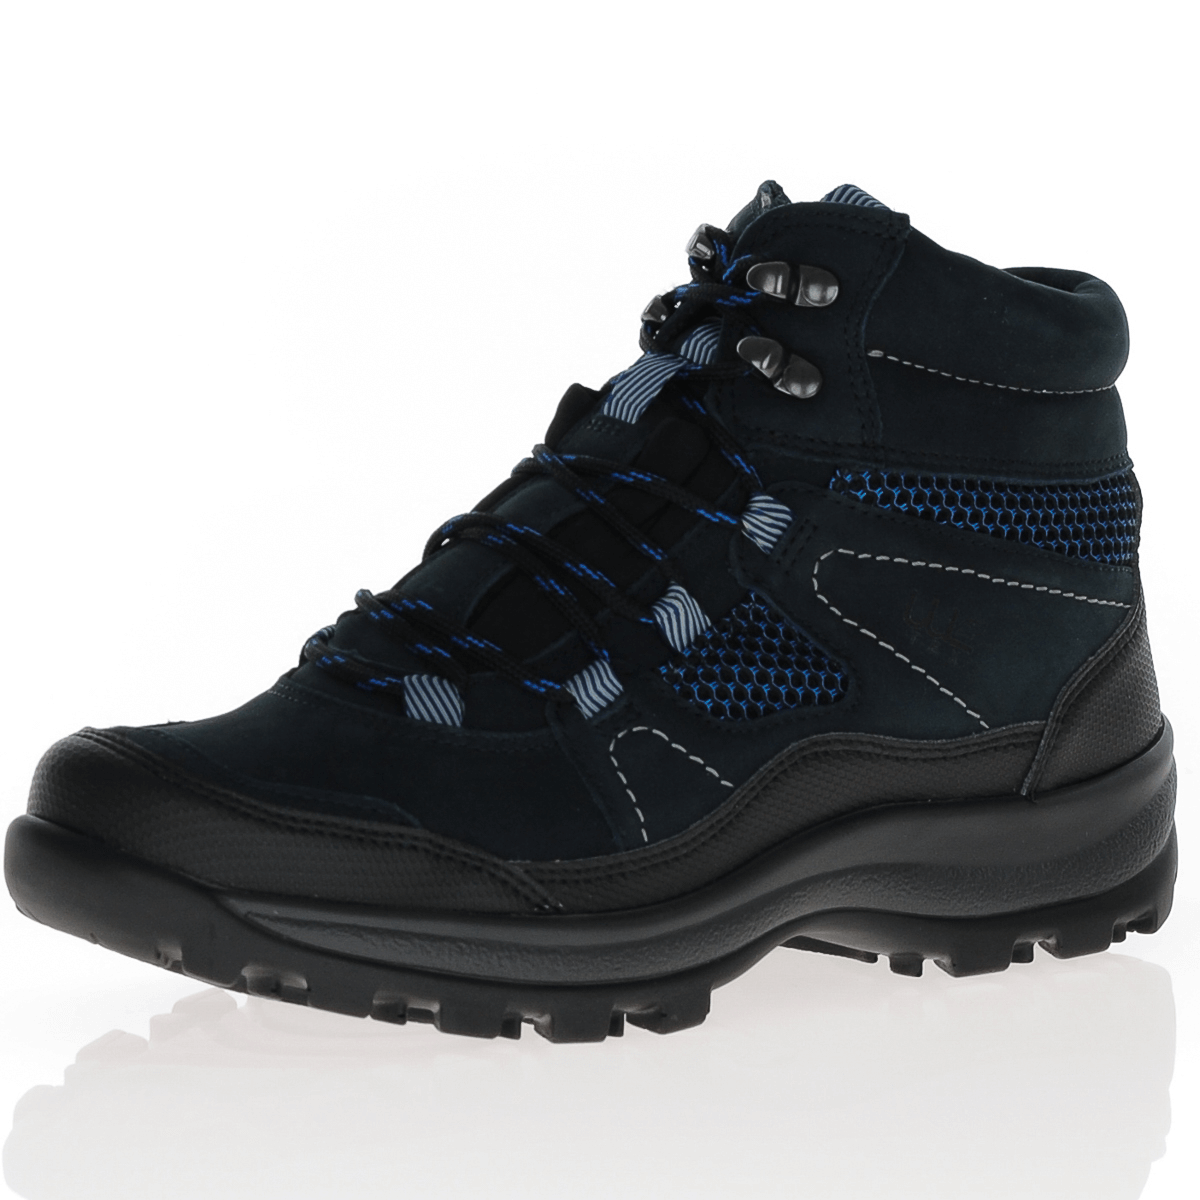 Waldlaufer - Waterproof Lace Up Boots Navy/Black - 471974, The Shoe Horn